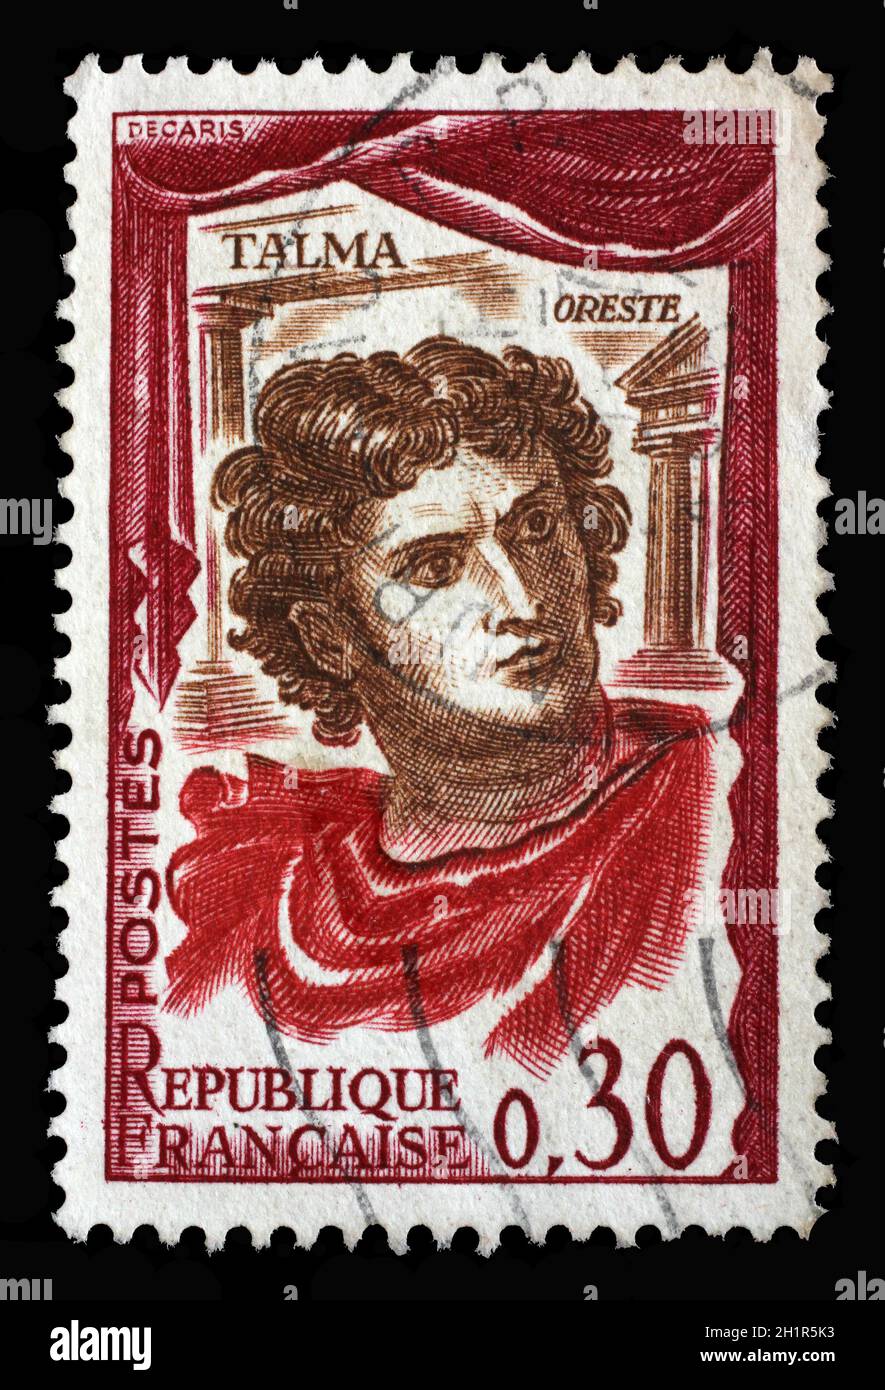 Stamp printed in the France shows French actor Francois Joseph Talma (1763-1826), famous French actor for classical tragedy, Famous actors series, cir Stock Photo